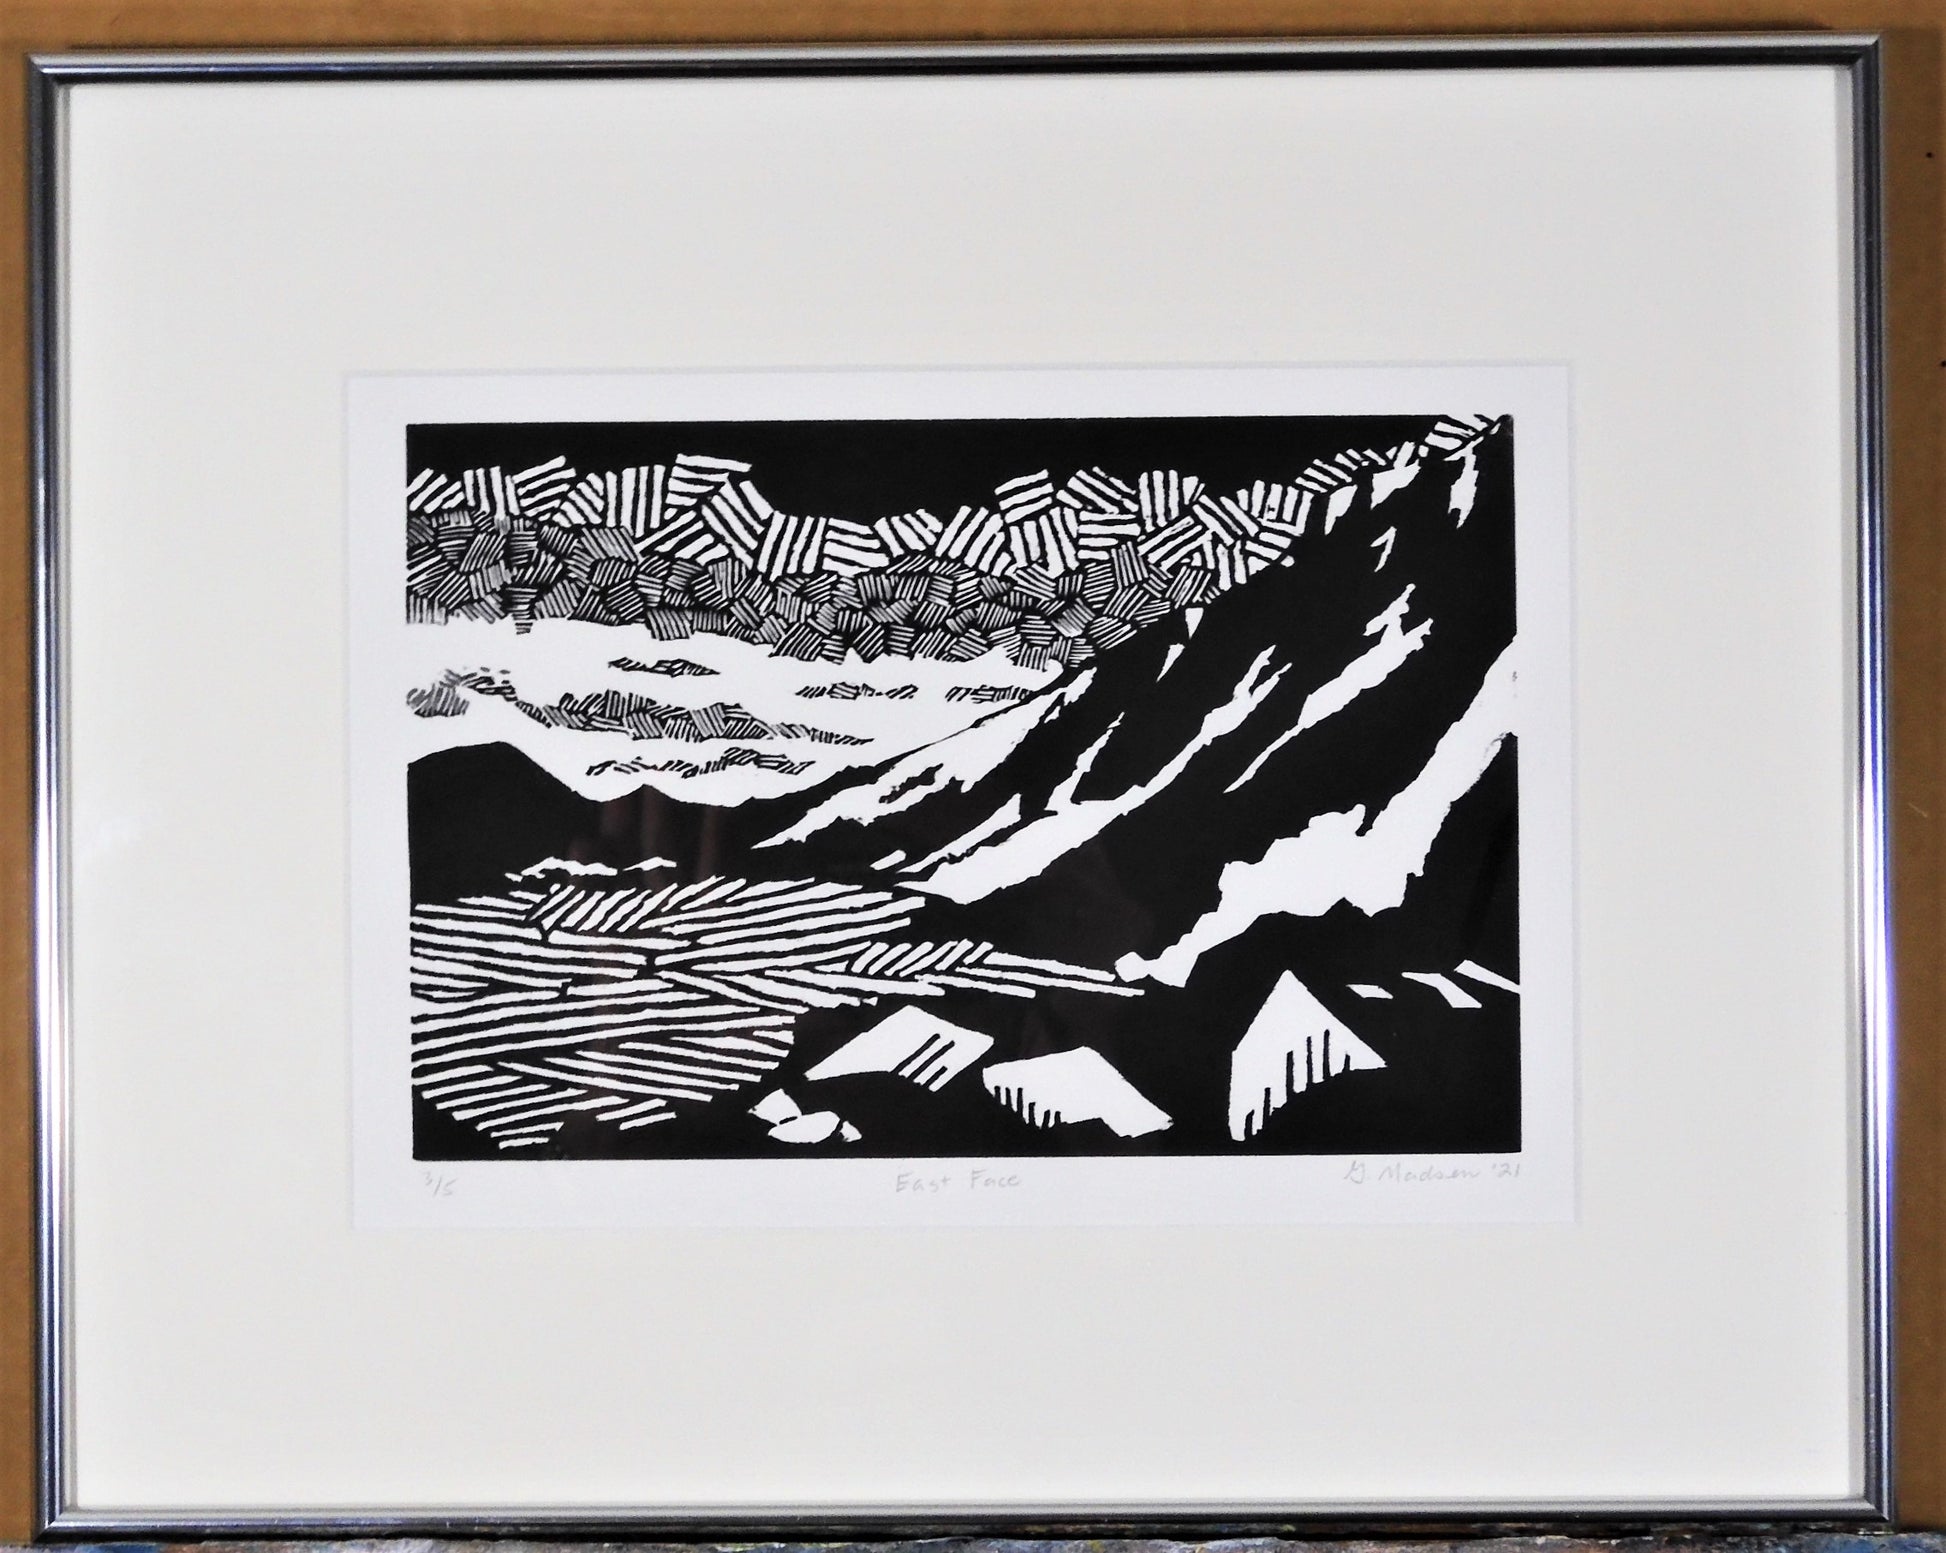 "East Face" Framed Relief Print Artist: Ginnie Madsen  Framed  White Mat  Narrow silver frame  Black and white image of the Snowy range mountains est of Laramie Wyoming  6" wide x 9" long x 1" deep print only  12" wide  x 15" long x 1" deep framed only  Relief print  Please note, each relief is custom designed by the Artist , with a slight variation between each relief print